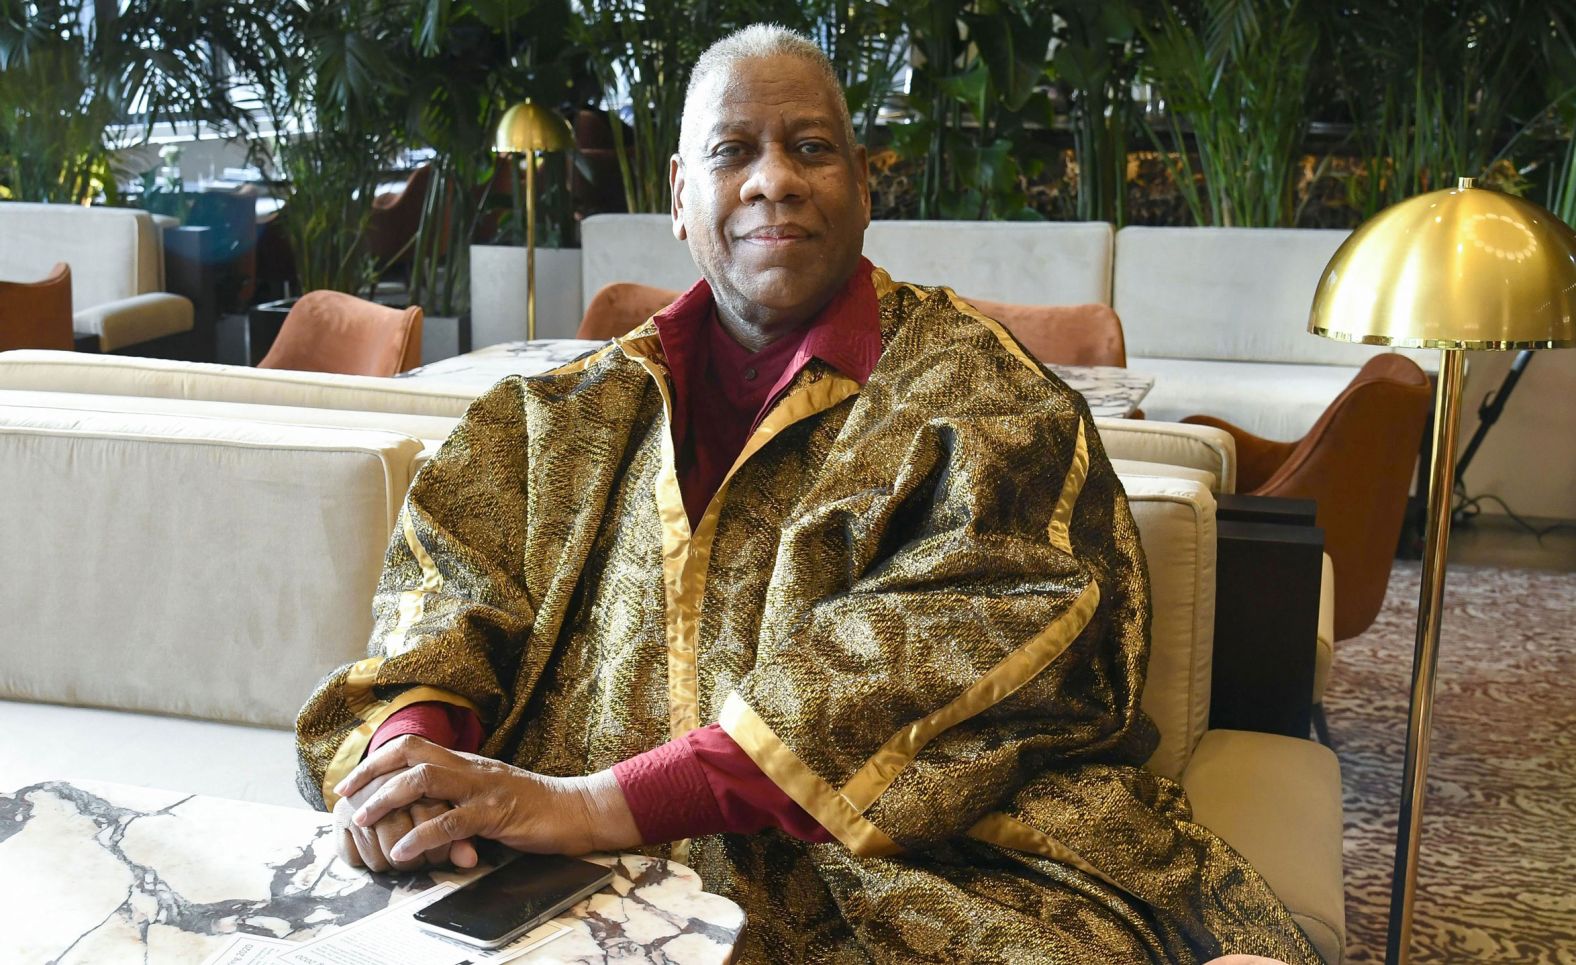 <a href="index.php?page=&url=https%3A%2F%2Fwww.cnn.com%2Fstyle%2Farticle%2Fandre-leon-talley-obit%2Findex.html" target="_blank">André Leon Talley,</a> the former longtime creative director for Vogue and a fashion icon in his own right, died January 18 at the age of 73, according to a statement on his official Instagram account. Talley was a pioneer in the fashion industry, a Black man in an often insular world dominated by White men and women.